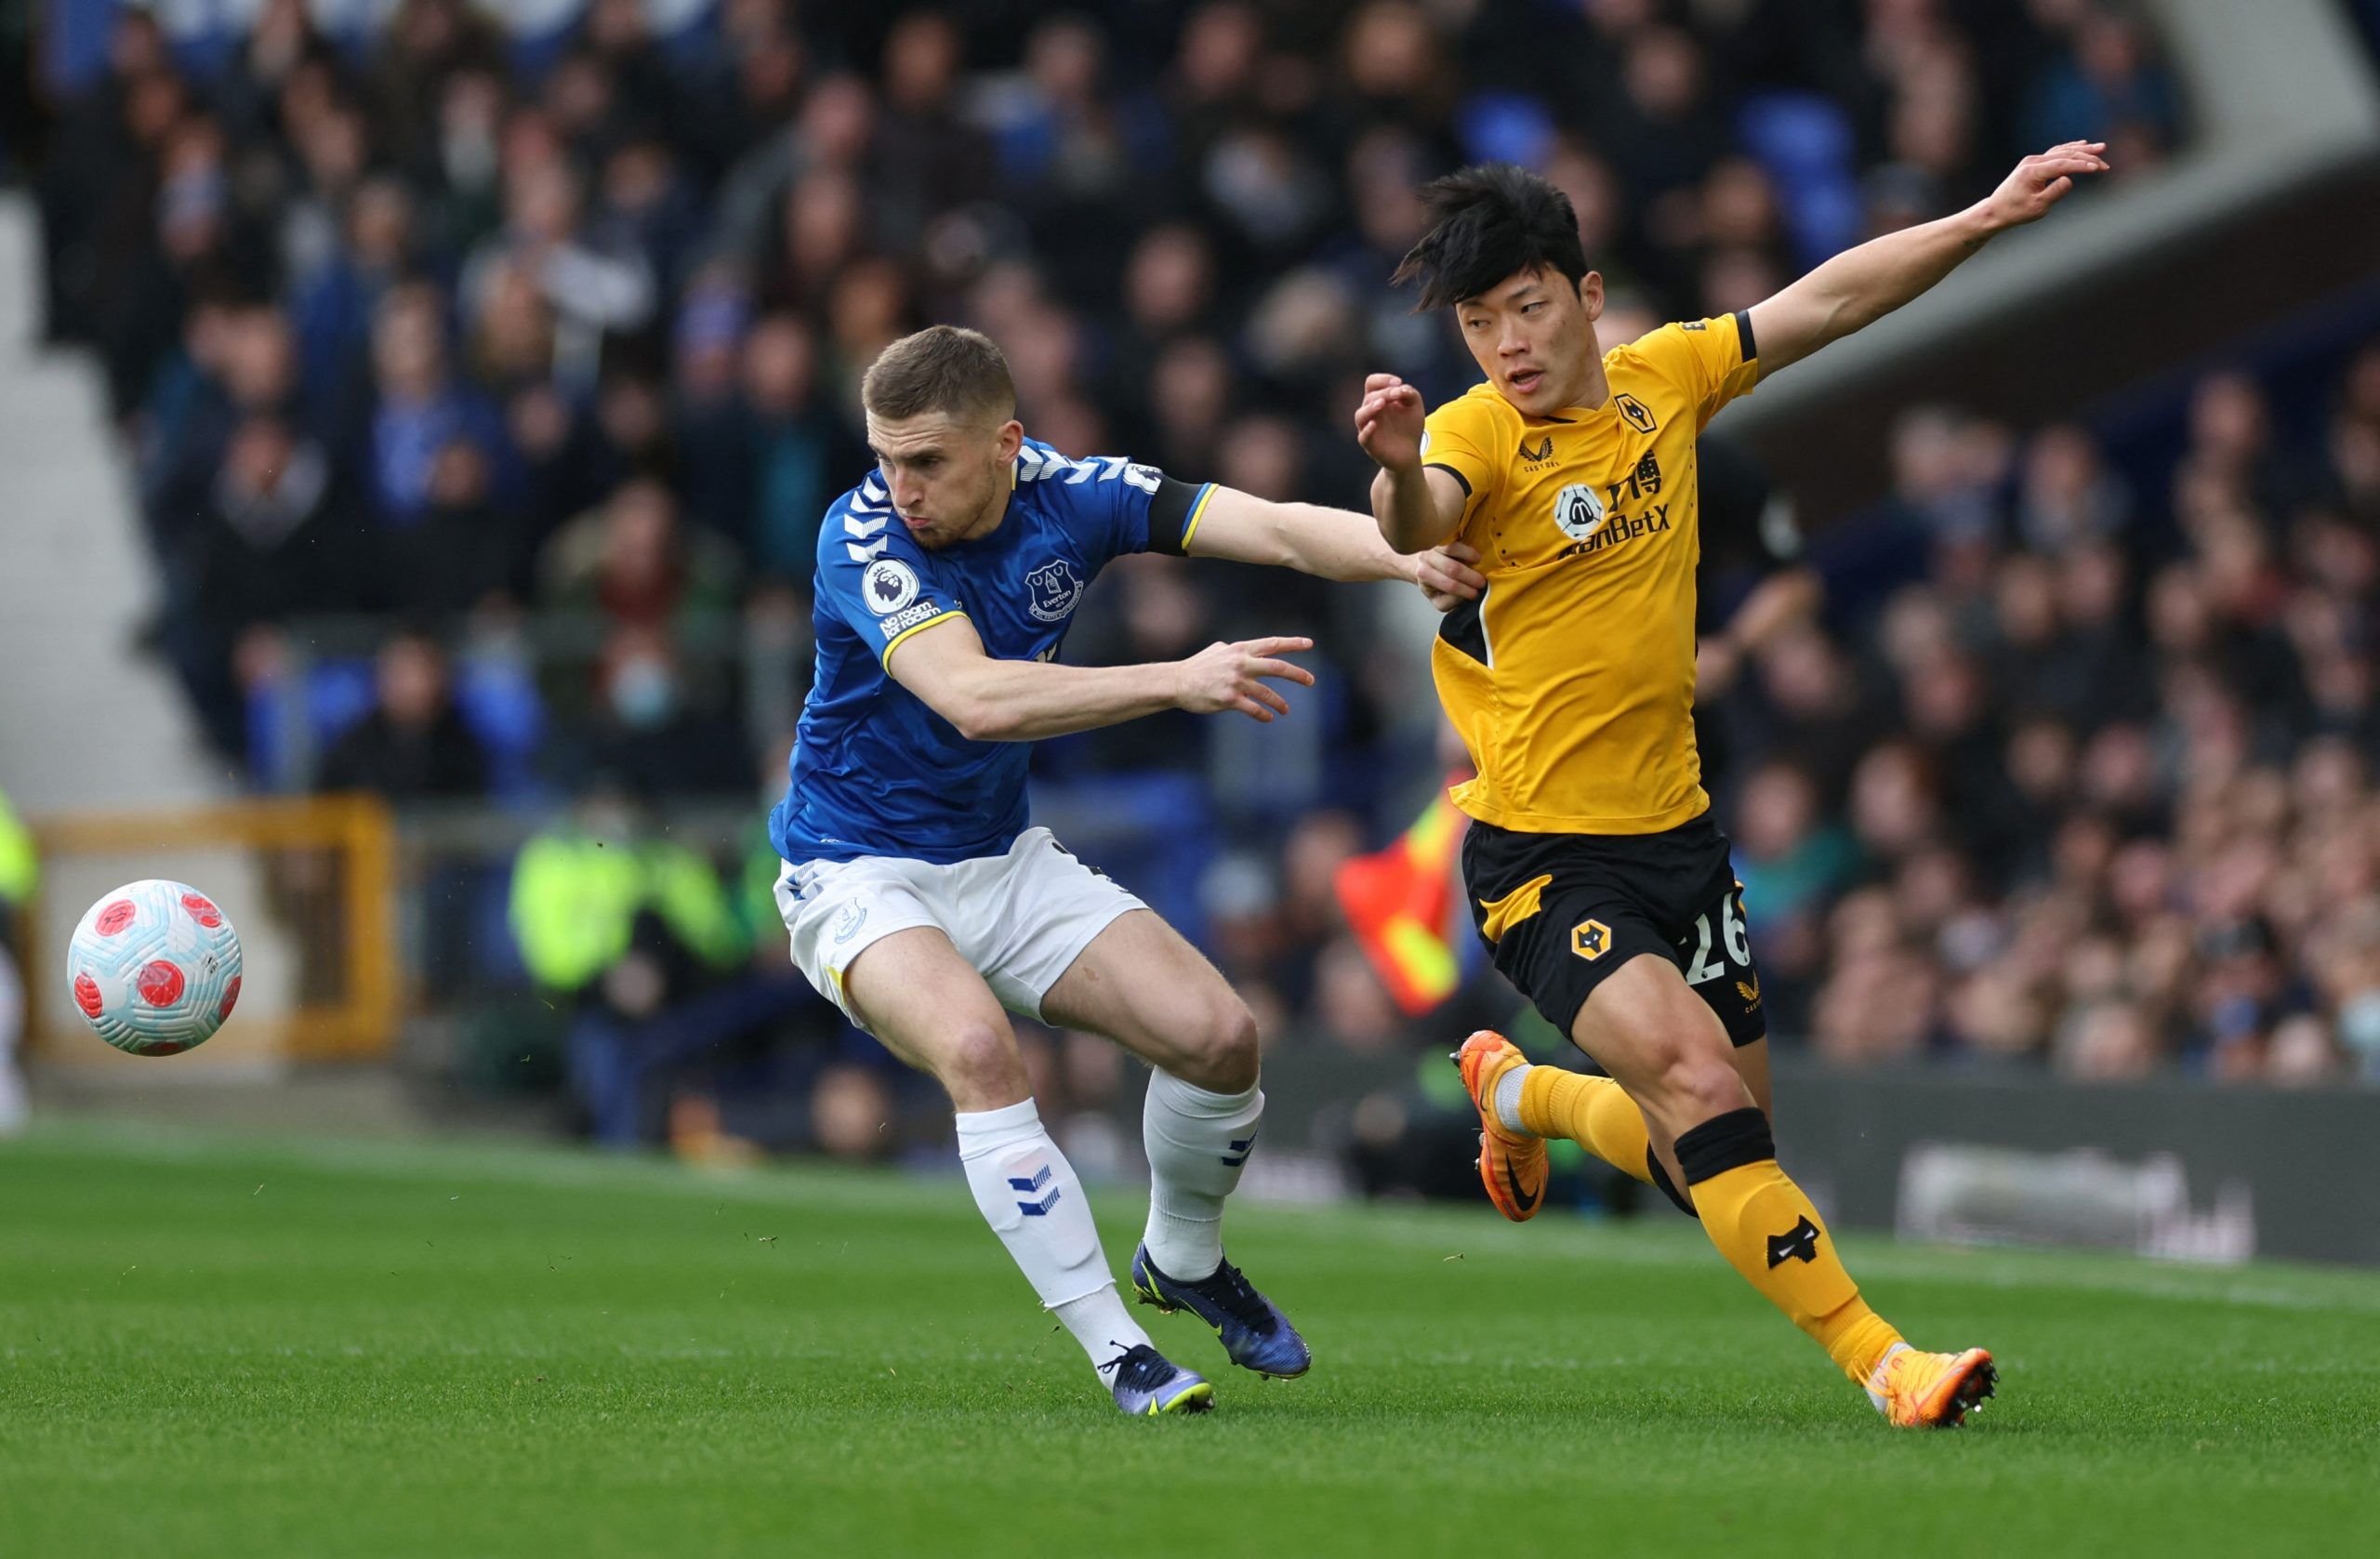 Soccer Football - Premier League - Everton v Wolverhampton Wanderers - Goodison Park, Liverpool, Britain - March 13, 2022 Everton's Jonjoe Kenny in action with Wolverhampton Wanderers' Hwang Hee-Chan Action Images via Reuters/Carl Recine EDITORIAL USE ONLY. No use with unauthorized audio, video, data, fixture lists, club/league logos or 'live' services. Online in-match use limited to 75 images, no video emulation. No use in betting, games or single club /league/player publications.  Please conta